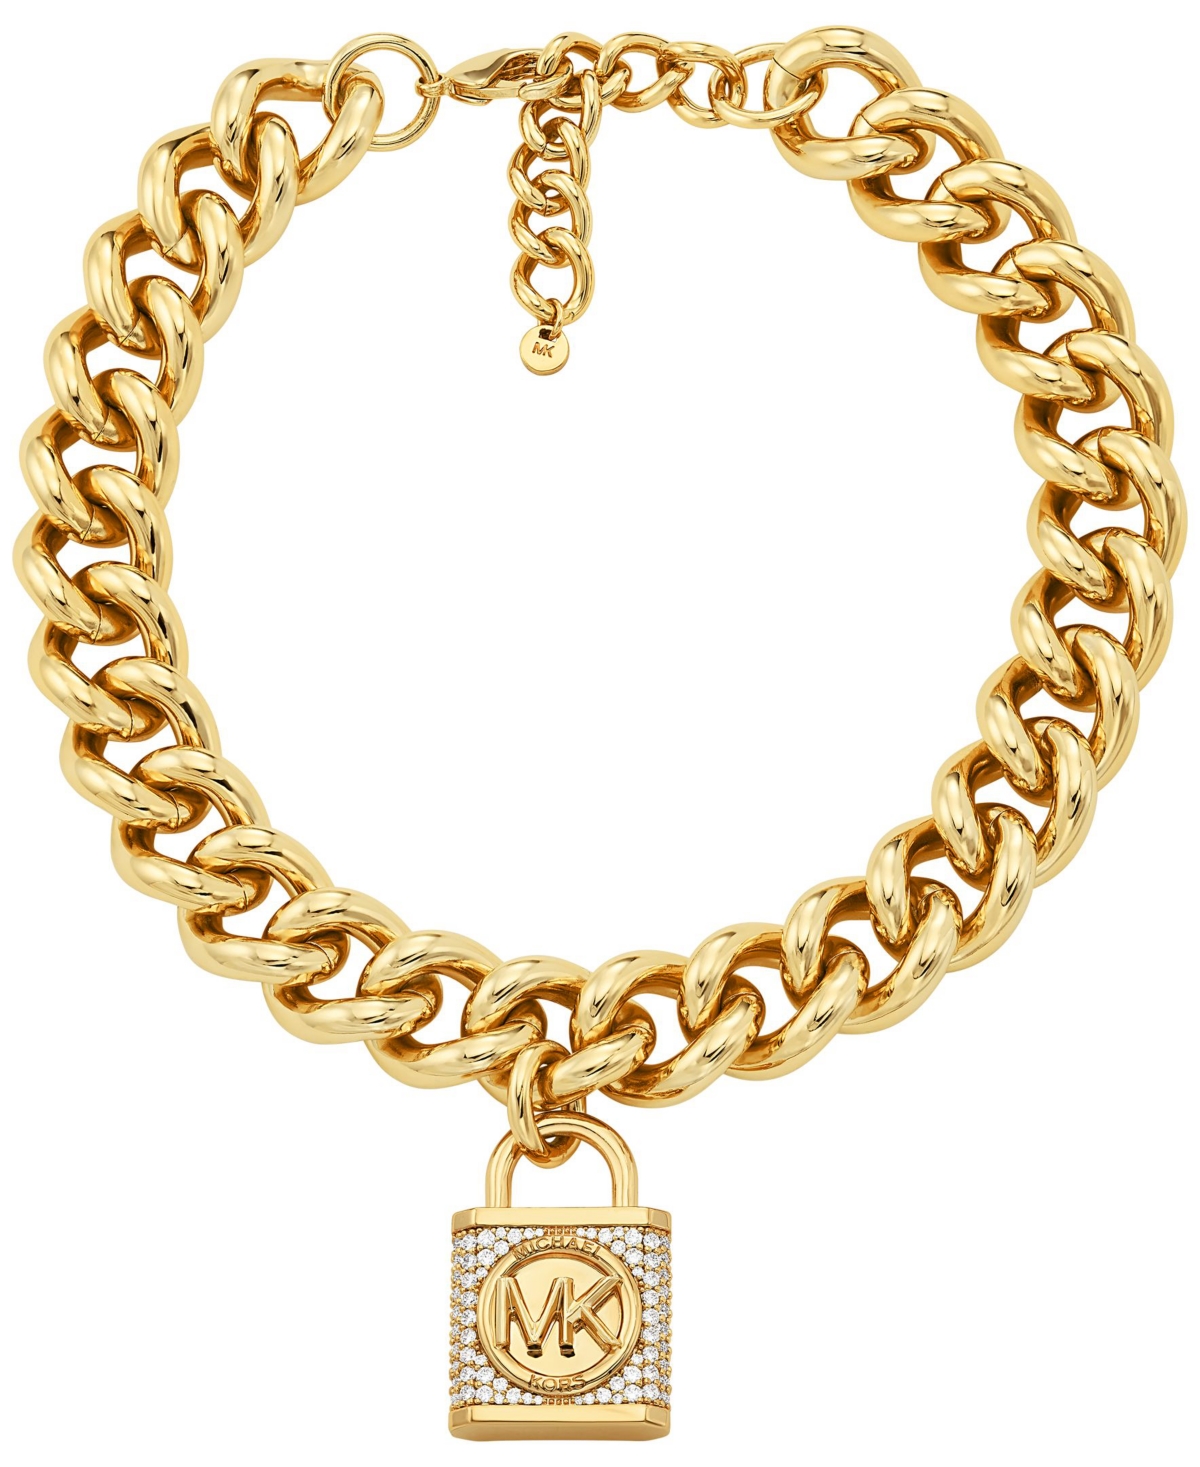 Michael Kors Statement Cubic Zirconia Pave Lock Chain Necklace In Gold